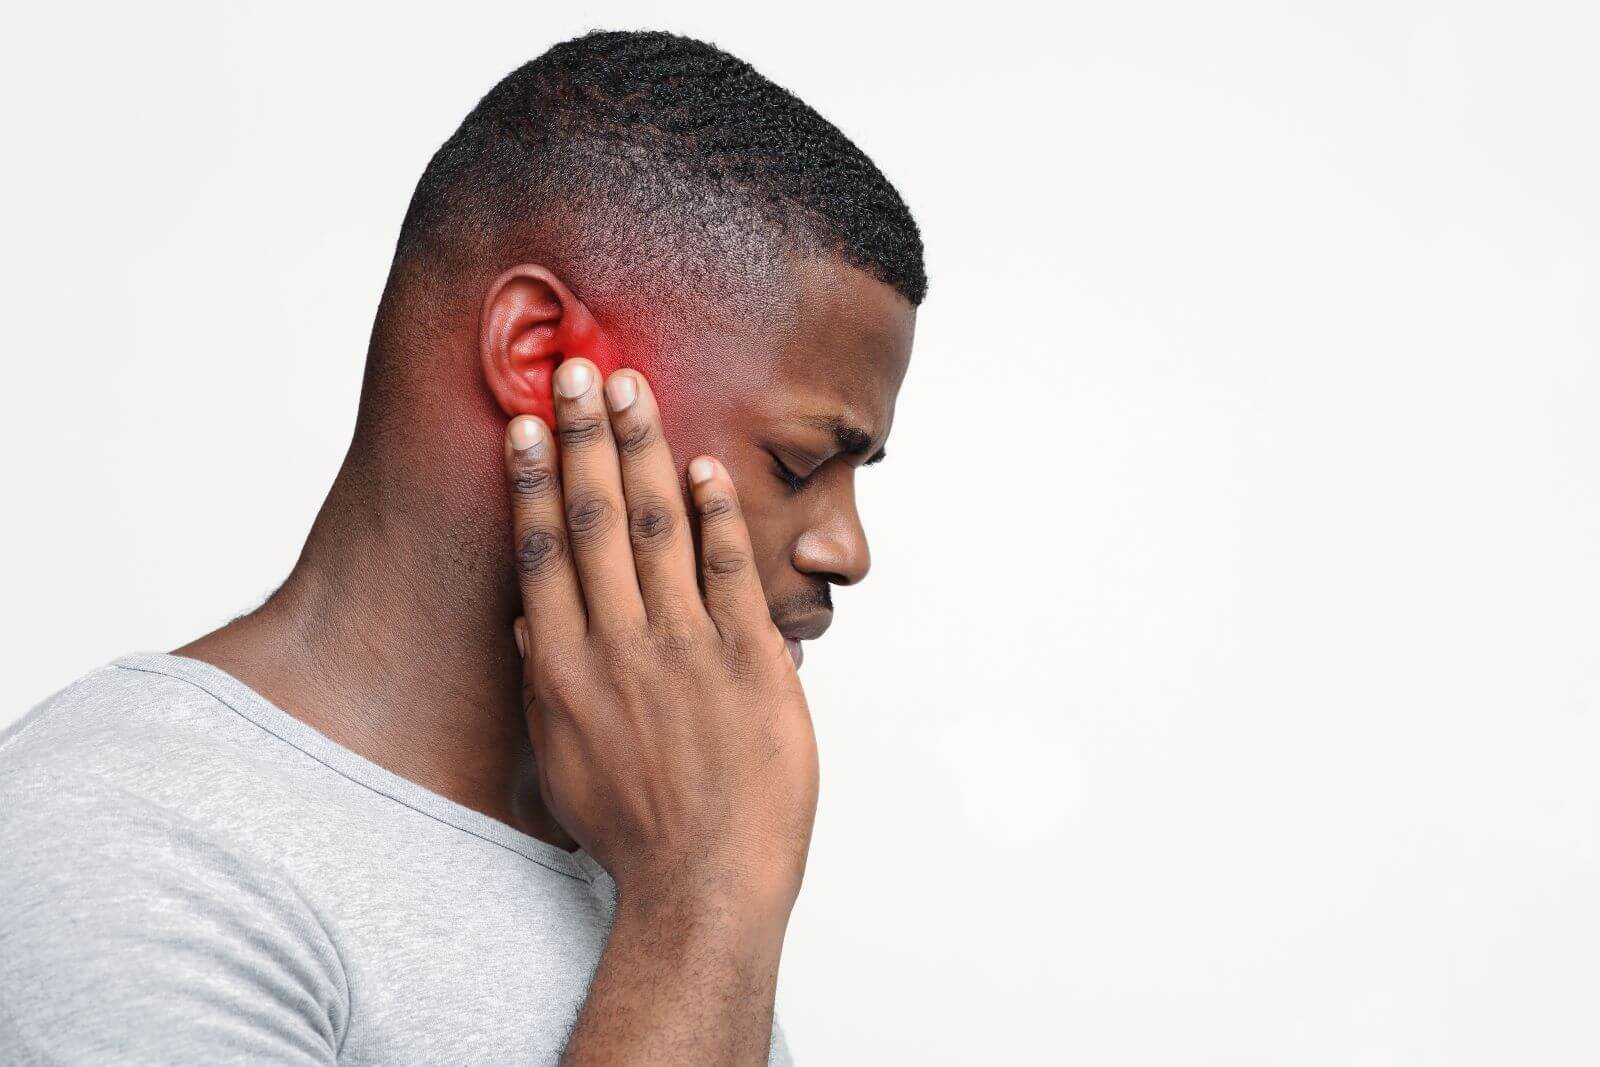 man grabs ear, ear is red indicating pain.